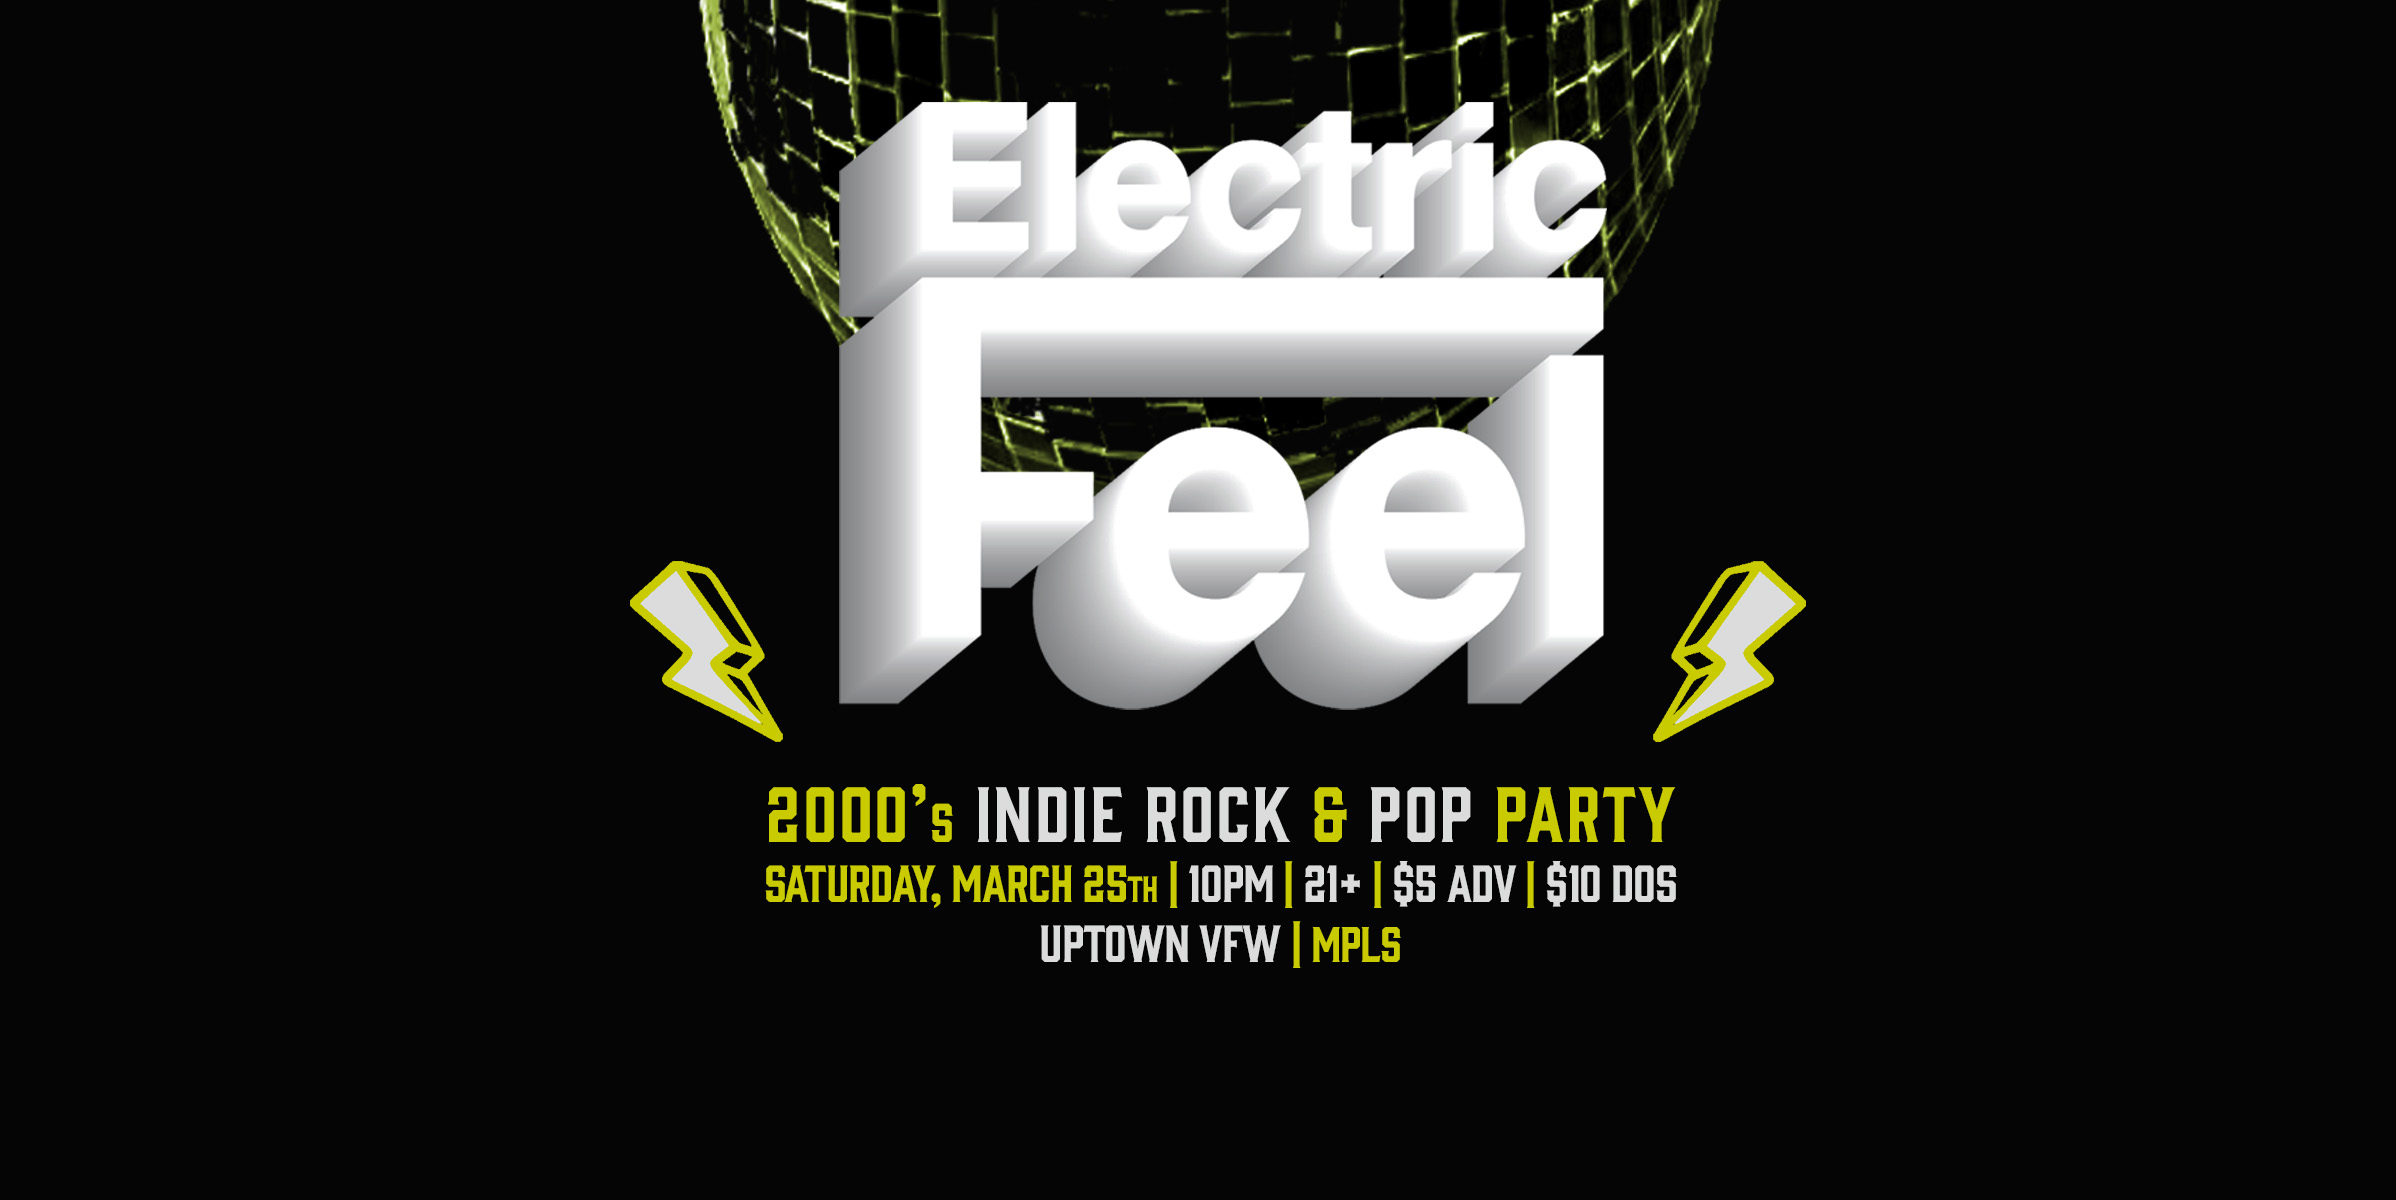 Electric Feel: 2000's Saturday March 25th James Ballentine "Uptown" VFW Post 246 2916 Lyndale Ave S Mpls Doors 10 pm:: Music 10 pm-2 am:: 21+ GA: $5 ADV / $10 DOS